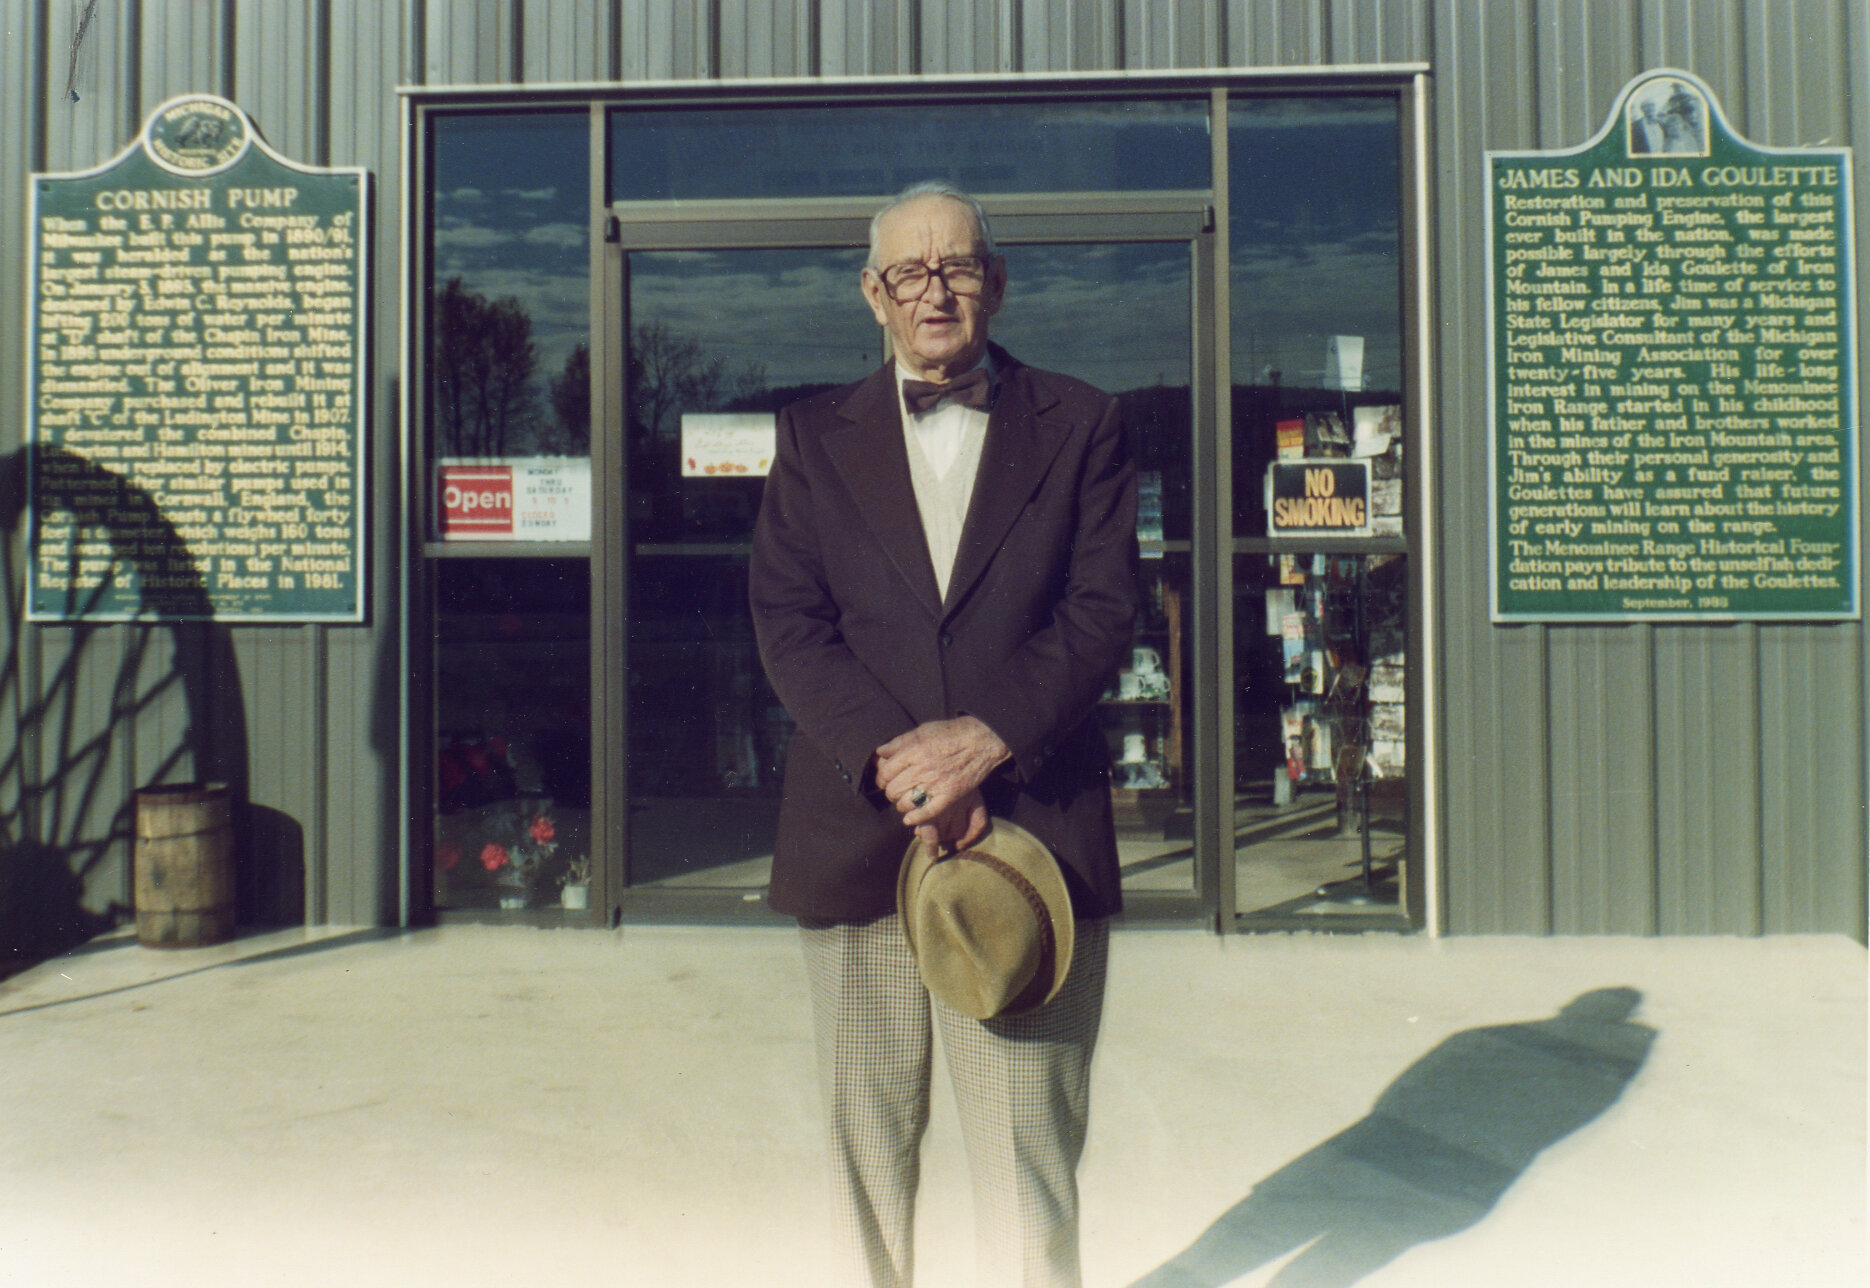 Cornish Pump Museum exterior with Jimmy Goulette, September 18, 1988.jpg